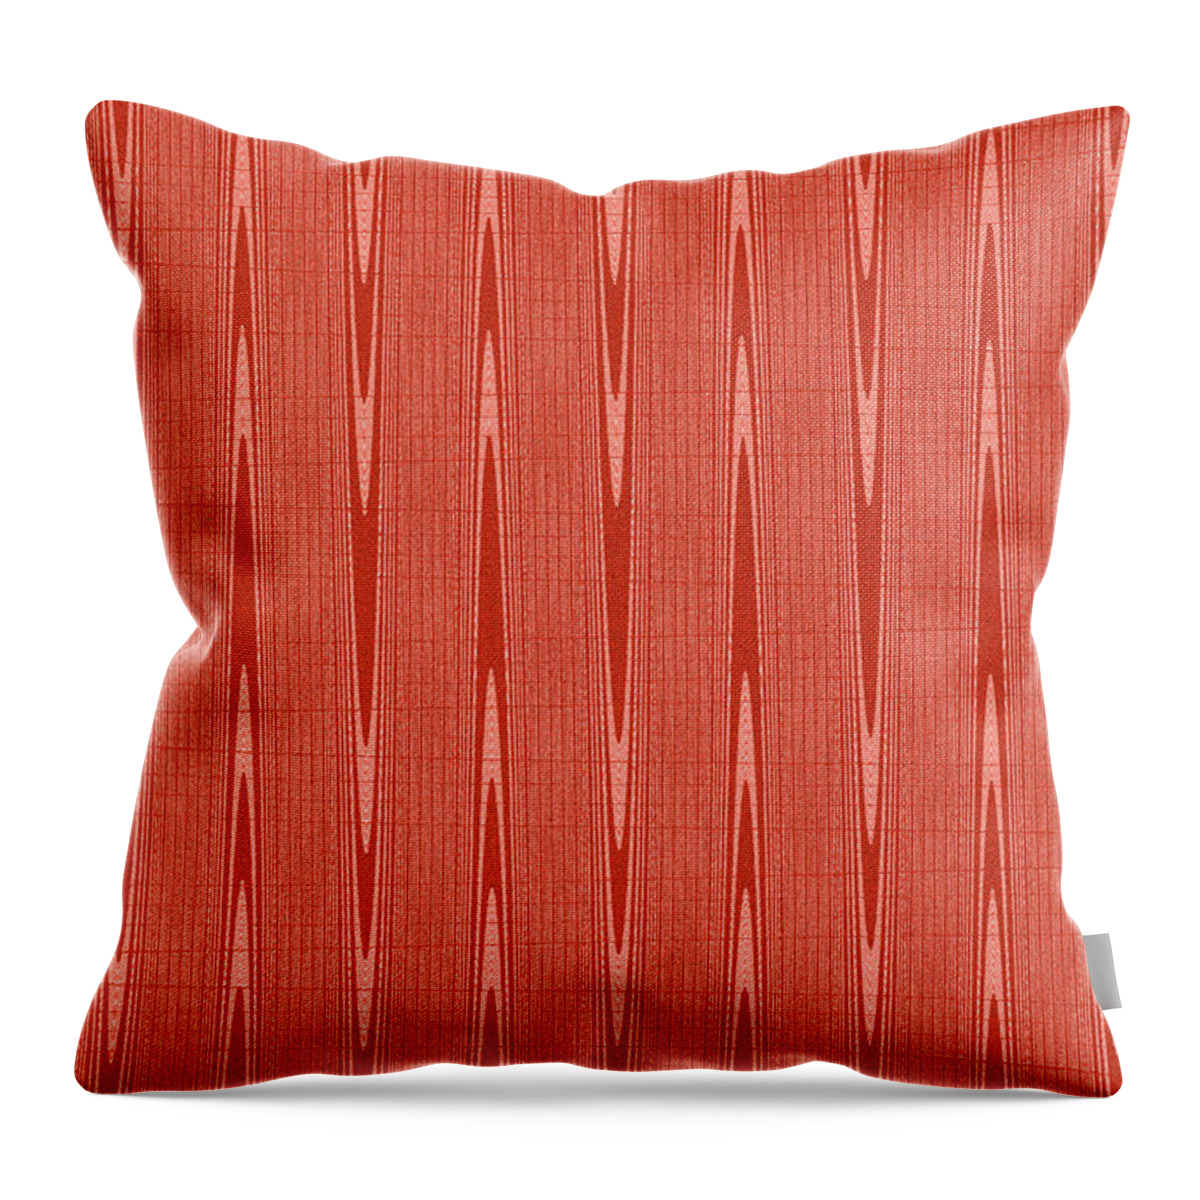 Red Janca Abstract Panel #1151ew1abr Throw Pillow featuring the digital art Red Janca Abstract Panel #1151ew1abr by Tom Janca